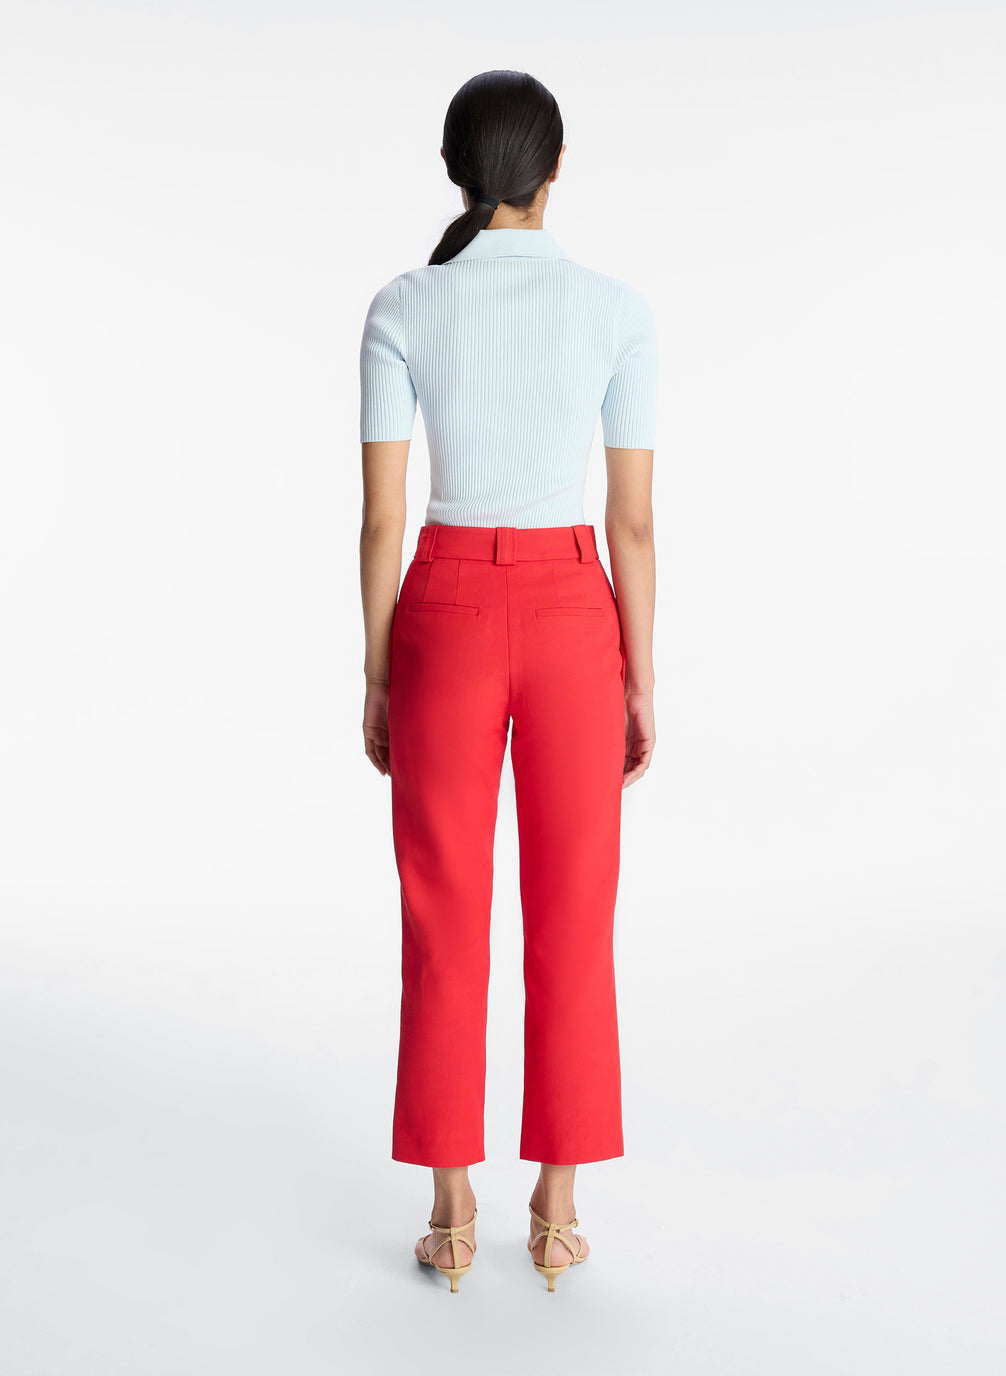 back view of woman wearing light blue collared shirt and red ankle pant